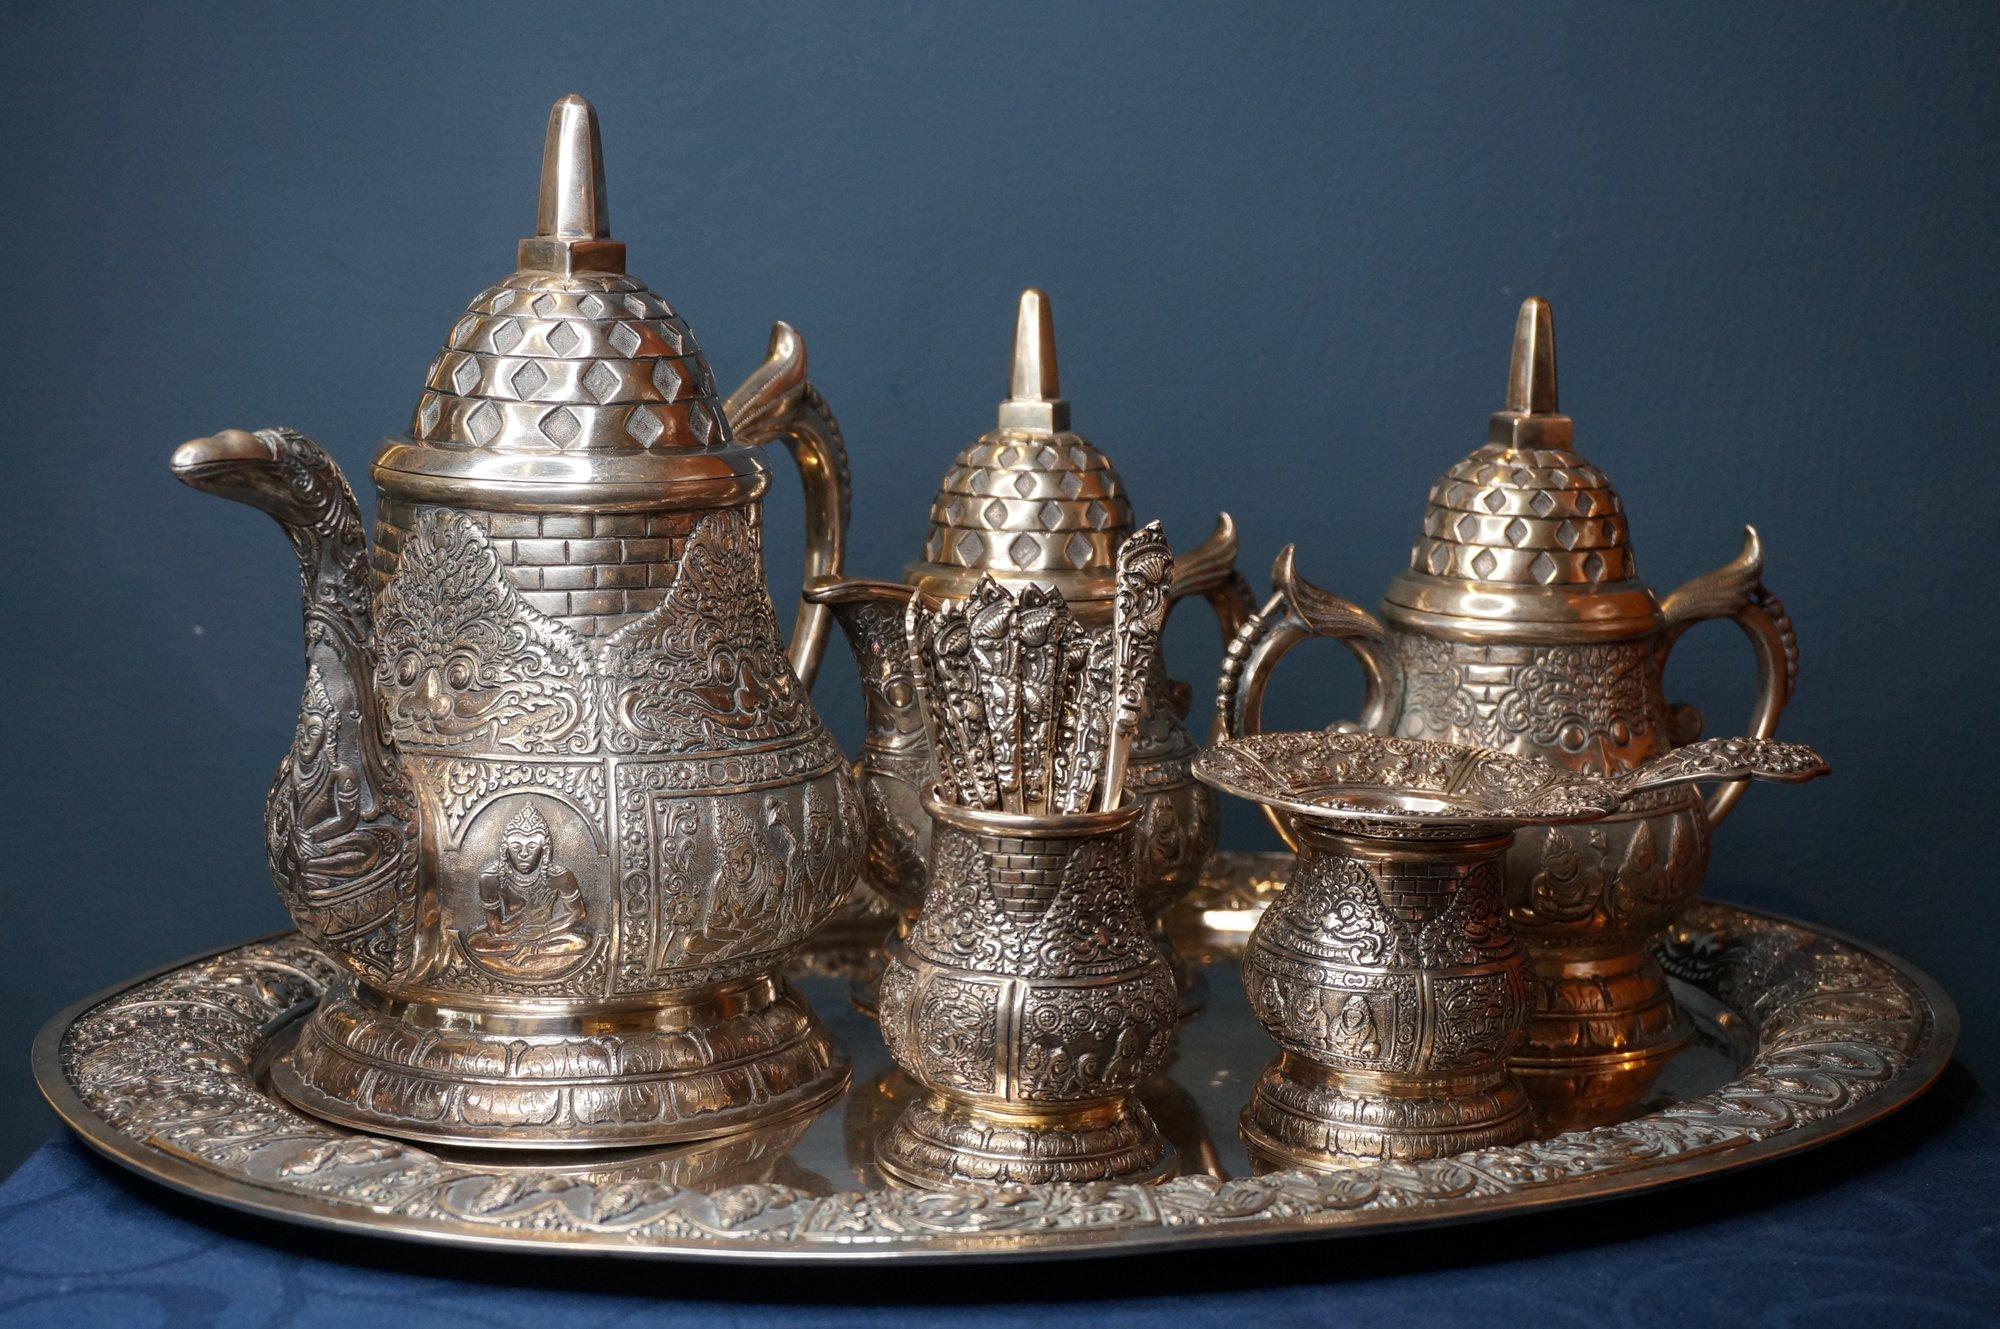 Rare elaborately decorated Jogja tea service with unusual decoration of boddhisatva, taotie masks, birds and pagoda-shaped lids. The tea service contains a teapot, coffeepot, sugarbowl, vase with 12 teaspoons and 1 sugar spoon and a vase with a tea